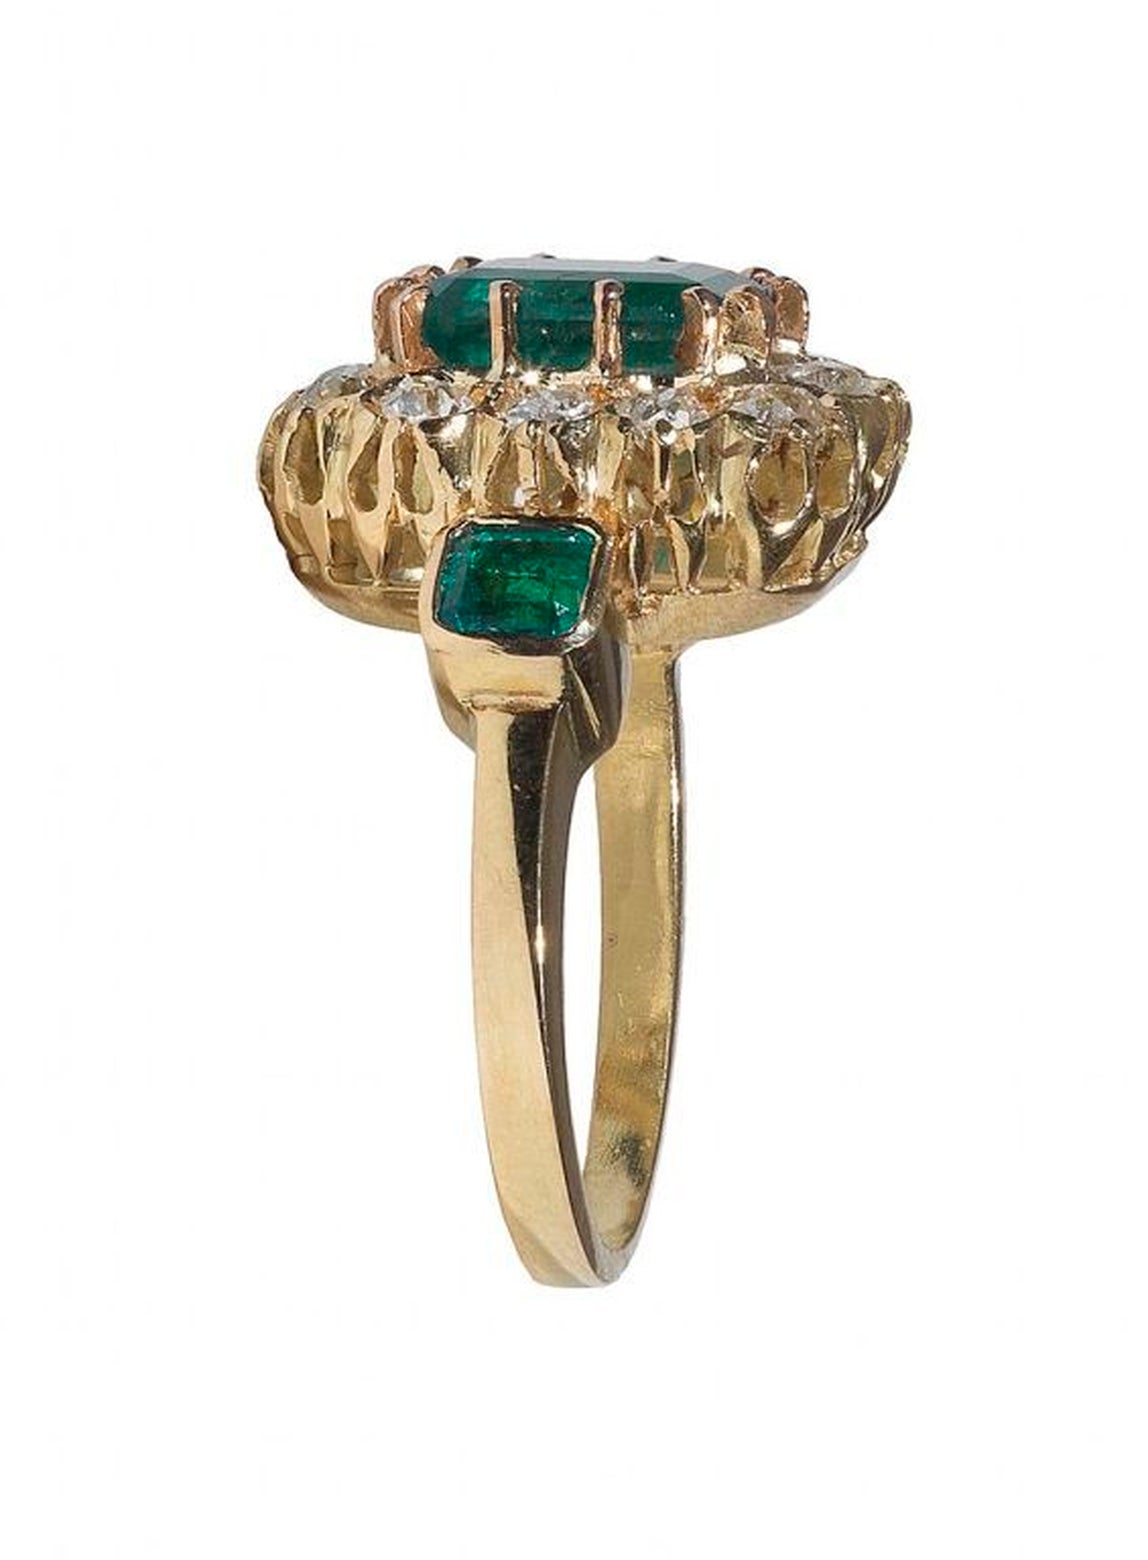 PLEASE NOTE: OUR PRICE IS FULLY INCLUSIVE OF SHIPPING, IMPORTATION TAXES & DUTIES.

The square cut claw set Colombian emerald weighing appoximately 2 cts, bordered by old cut diamonds weighing approximately 1,20cts, a square cut emerald collet